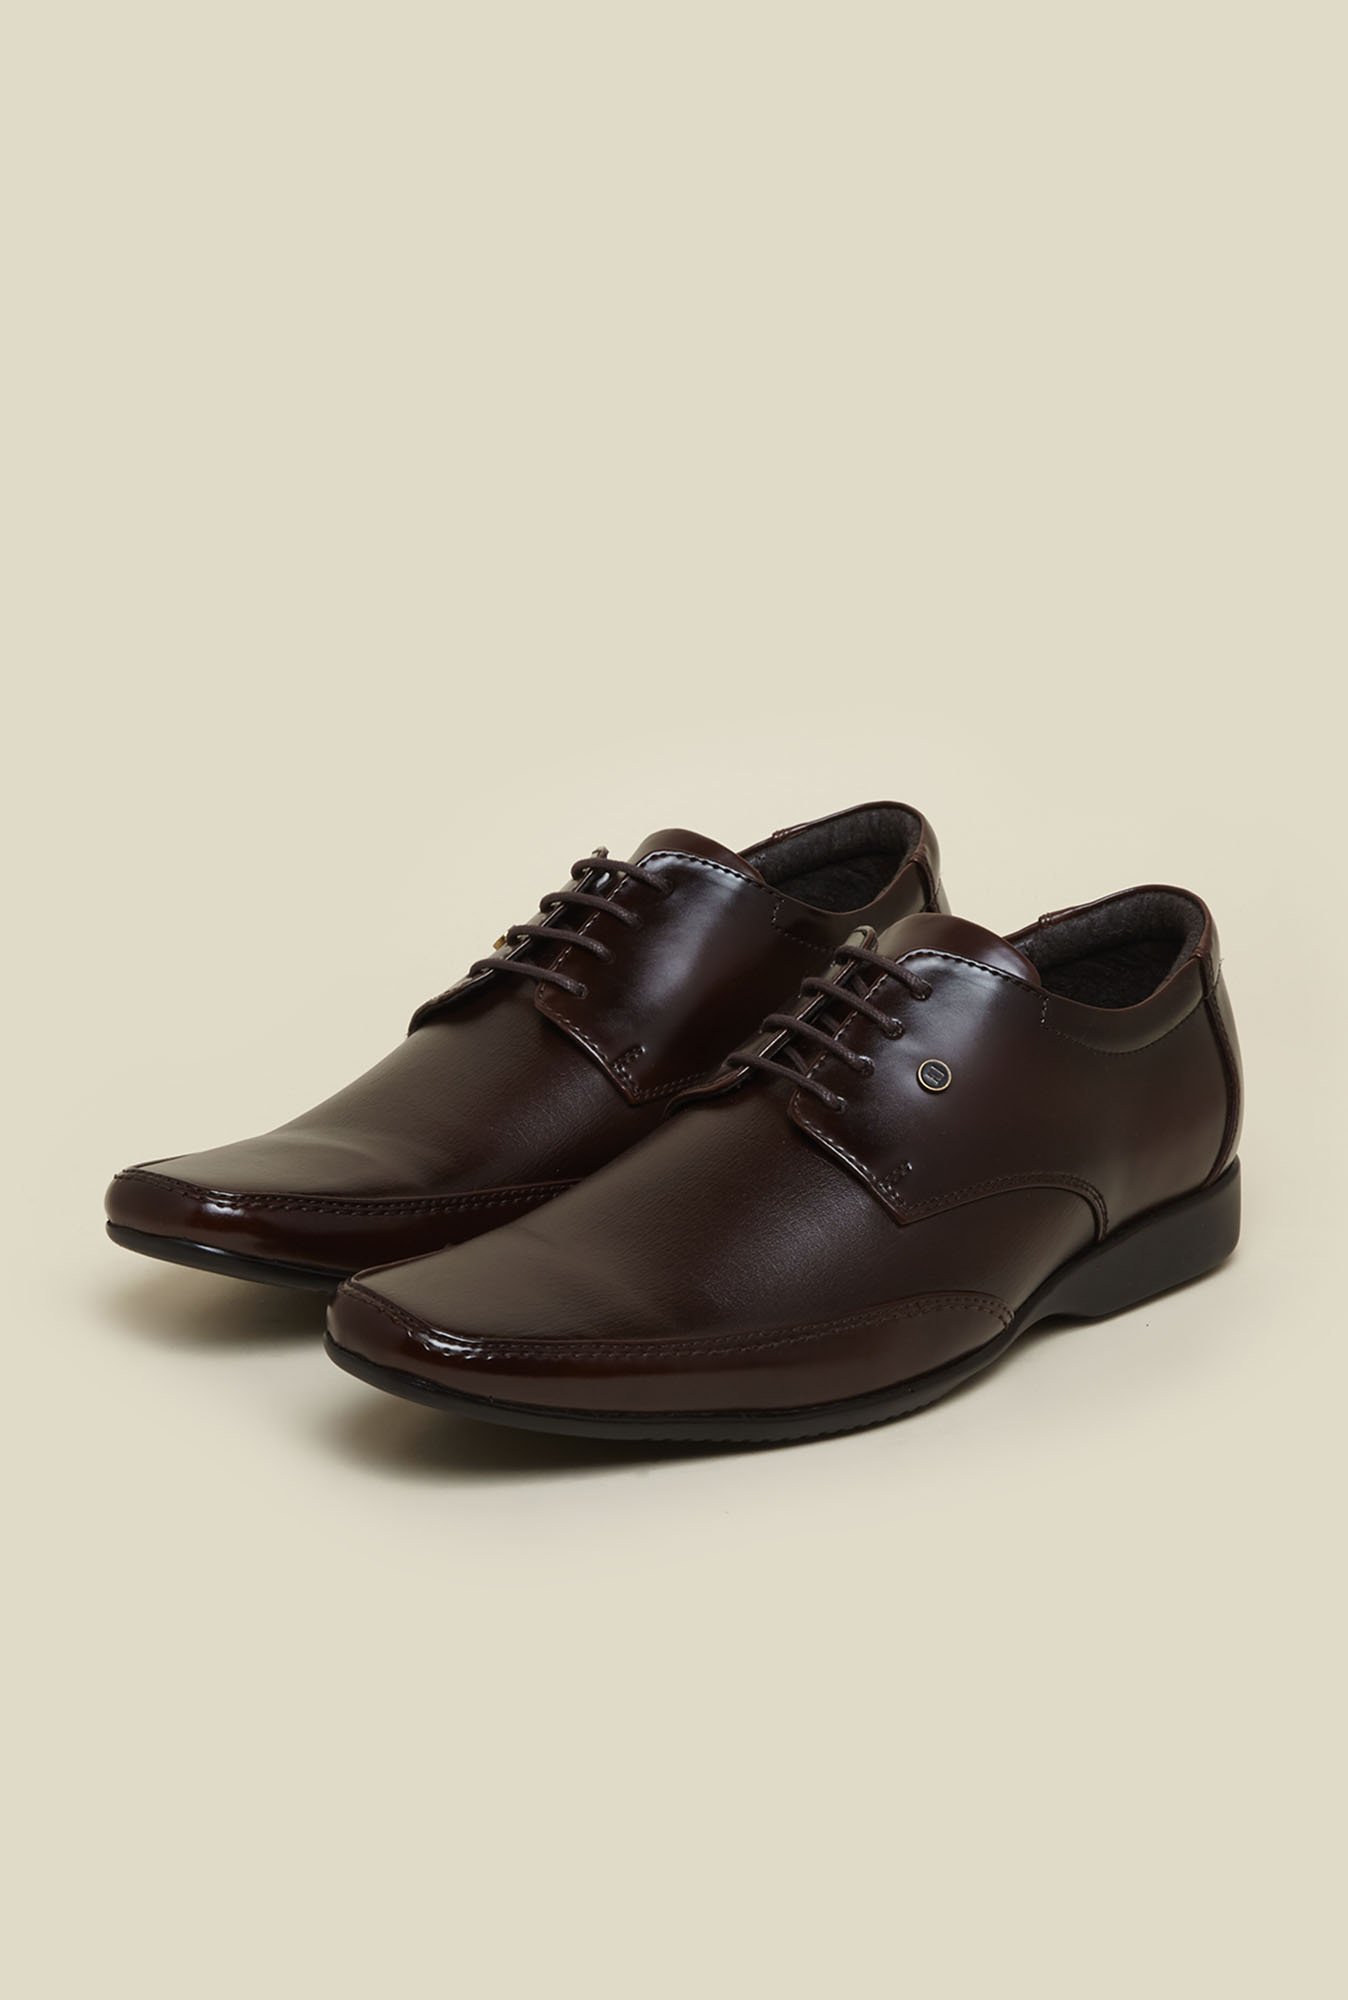 Franco Leone Tan Leather Formal Shoes 